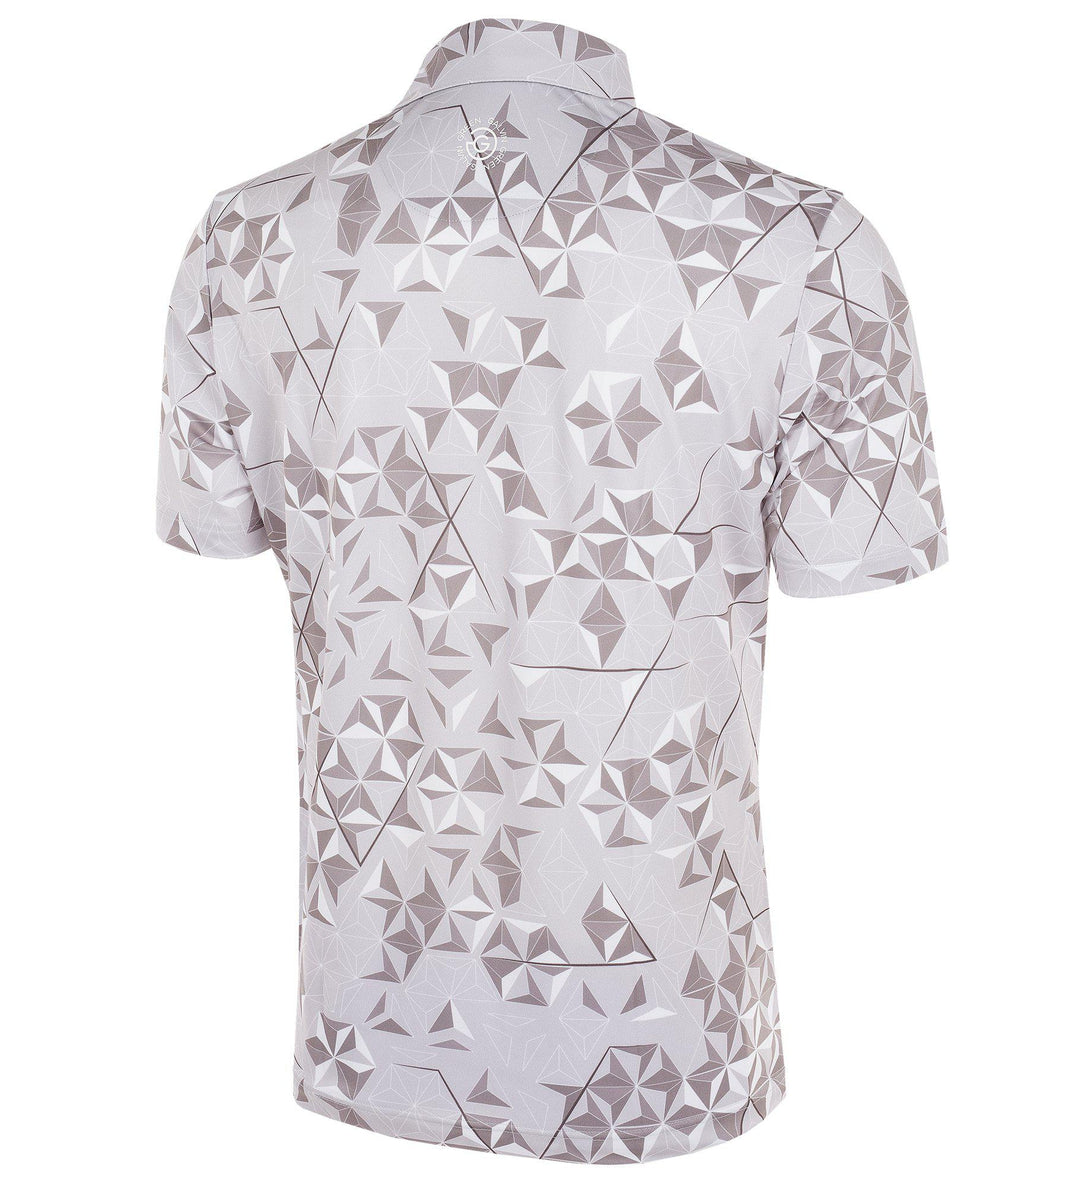 Makai is a Breathable short sleeve shirt for Men in the color Cool Grey(8)